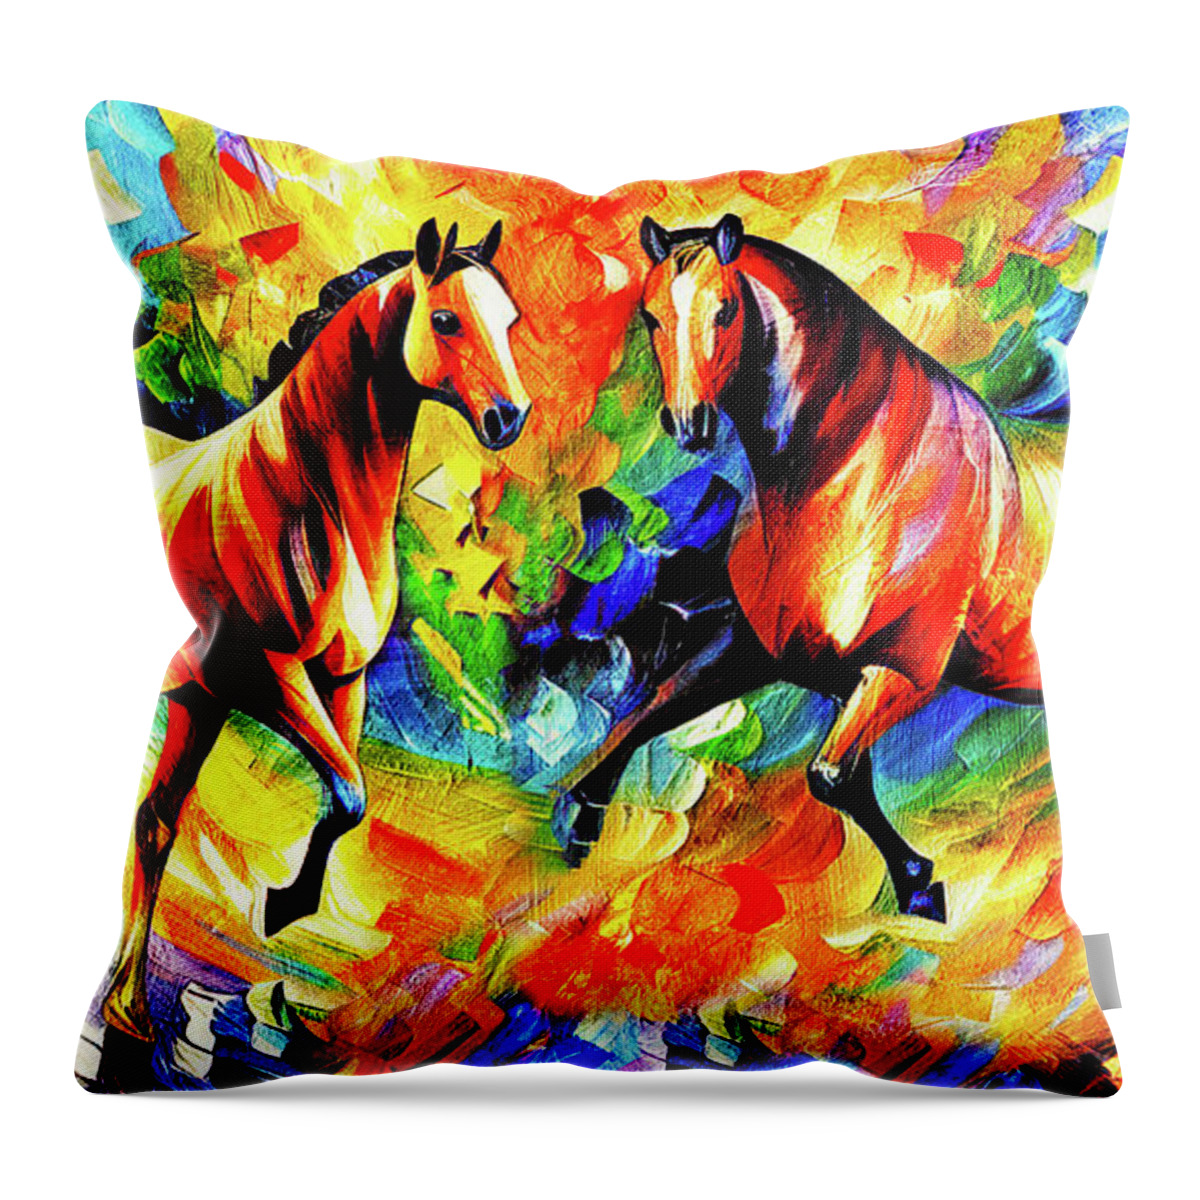 Horse Walking Throw Pillow featuring the digital art Colorful abstract horses meeting - digital painting on colorful background by Nicko Prints